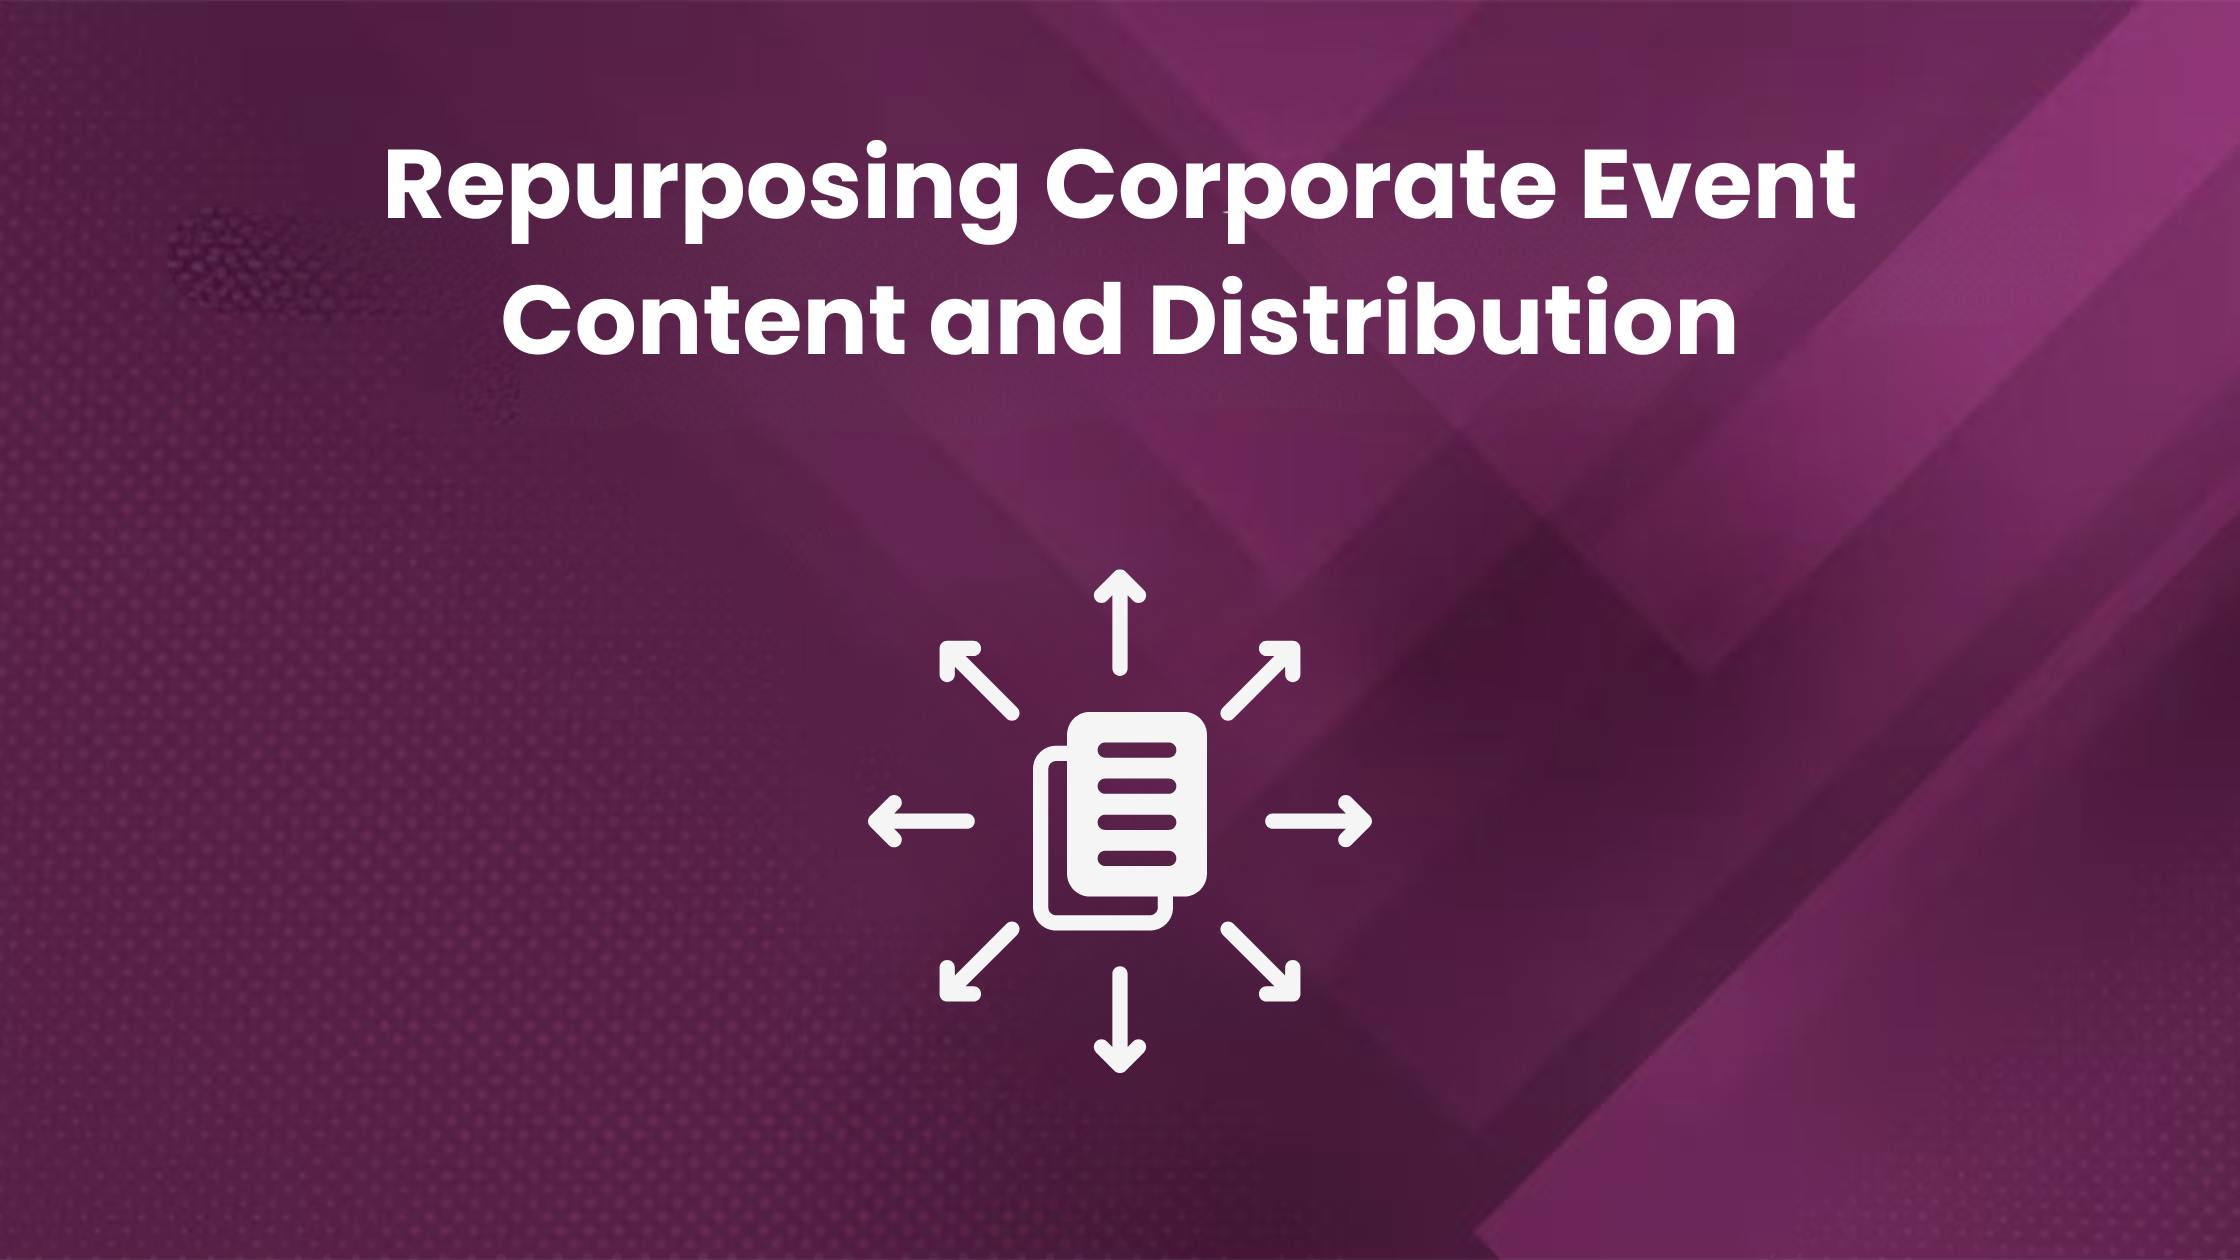 Repurposing corporate event content and distribution